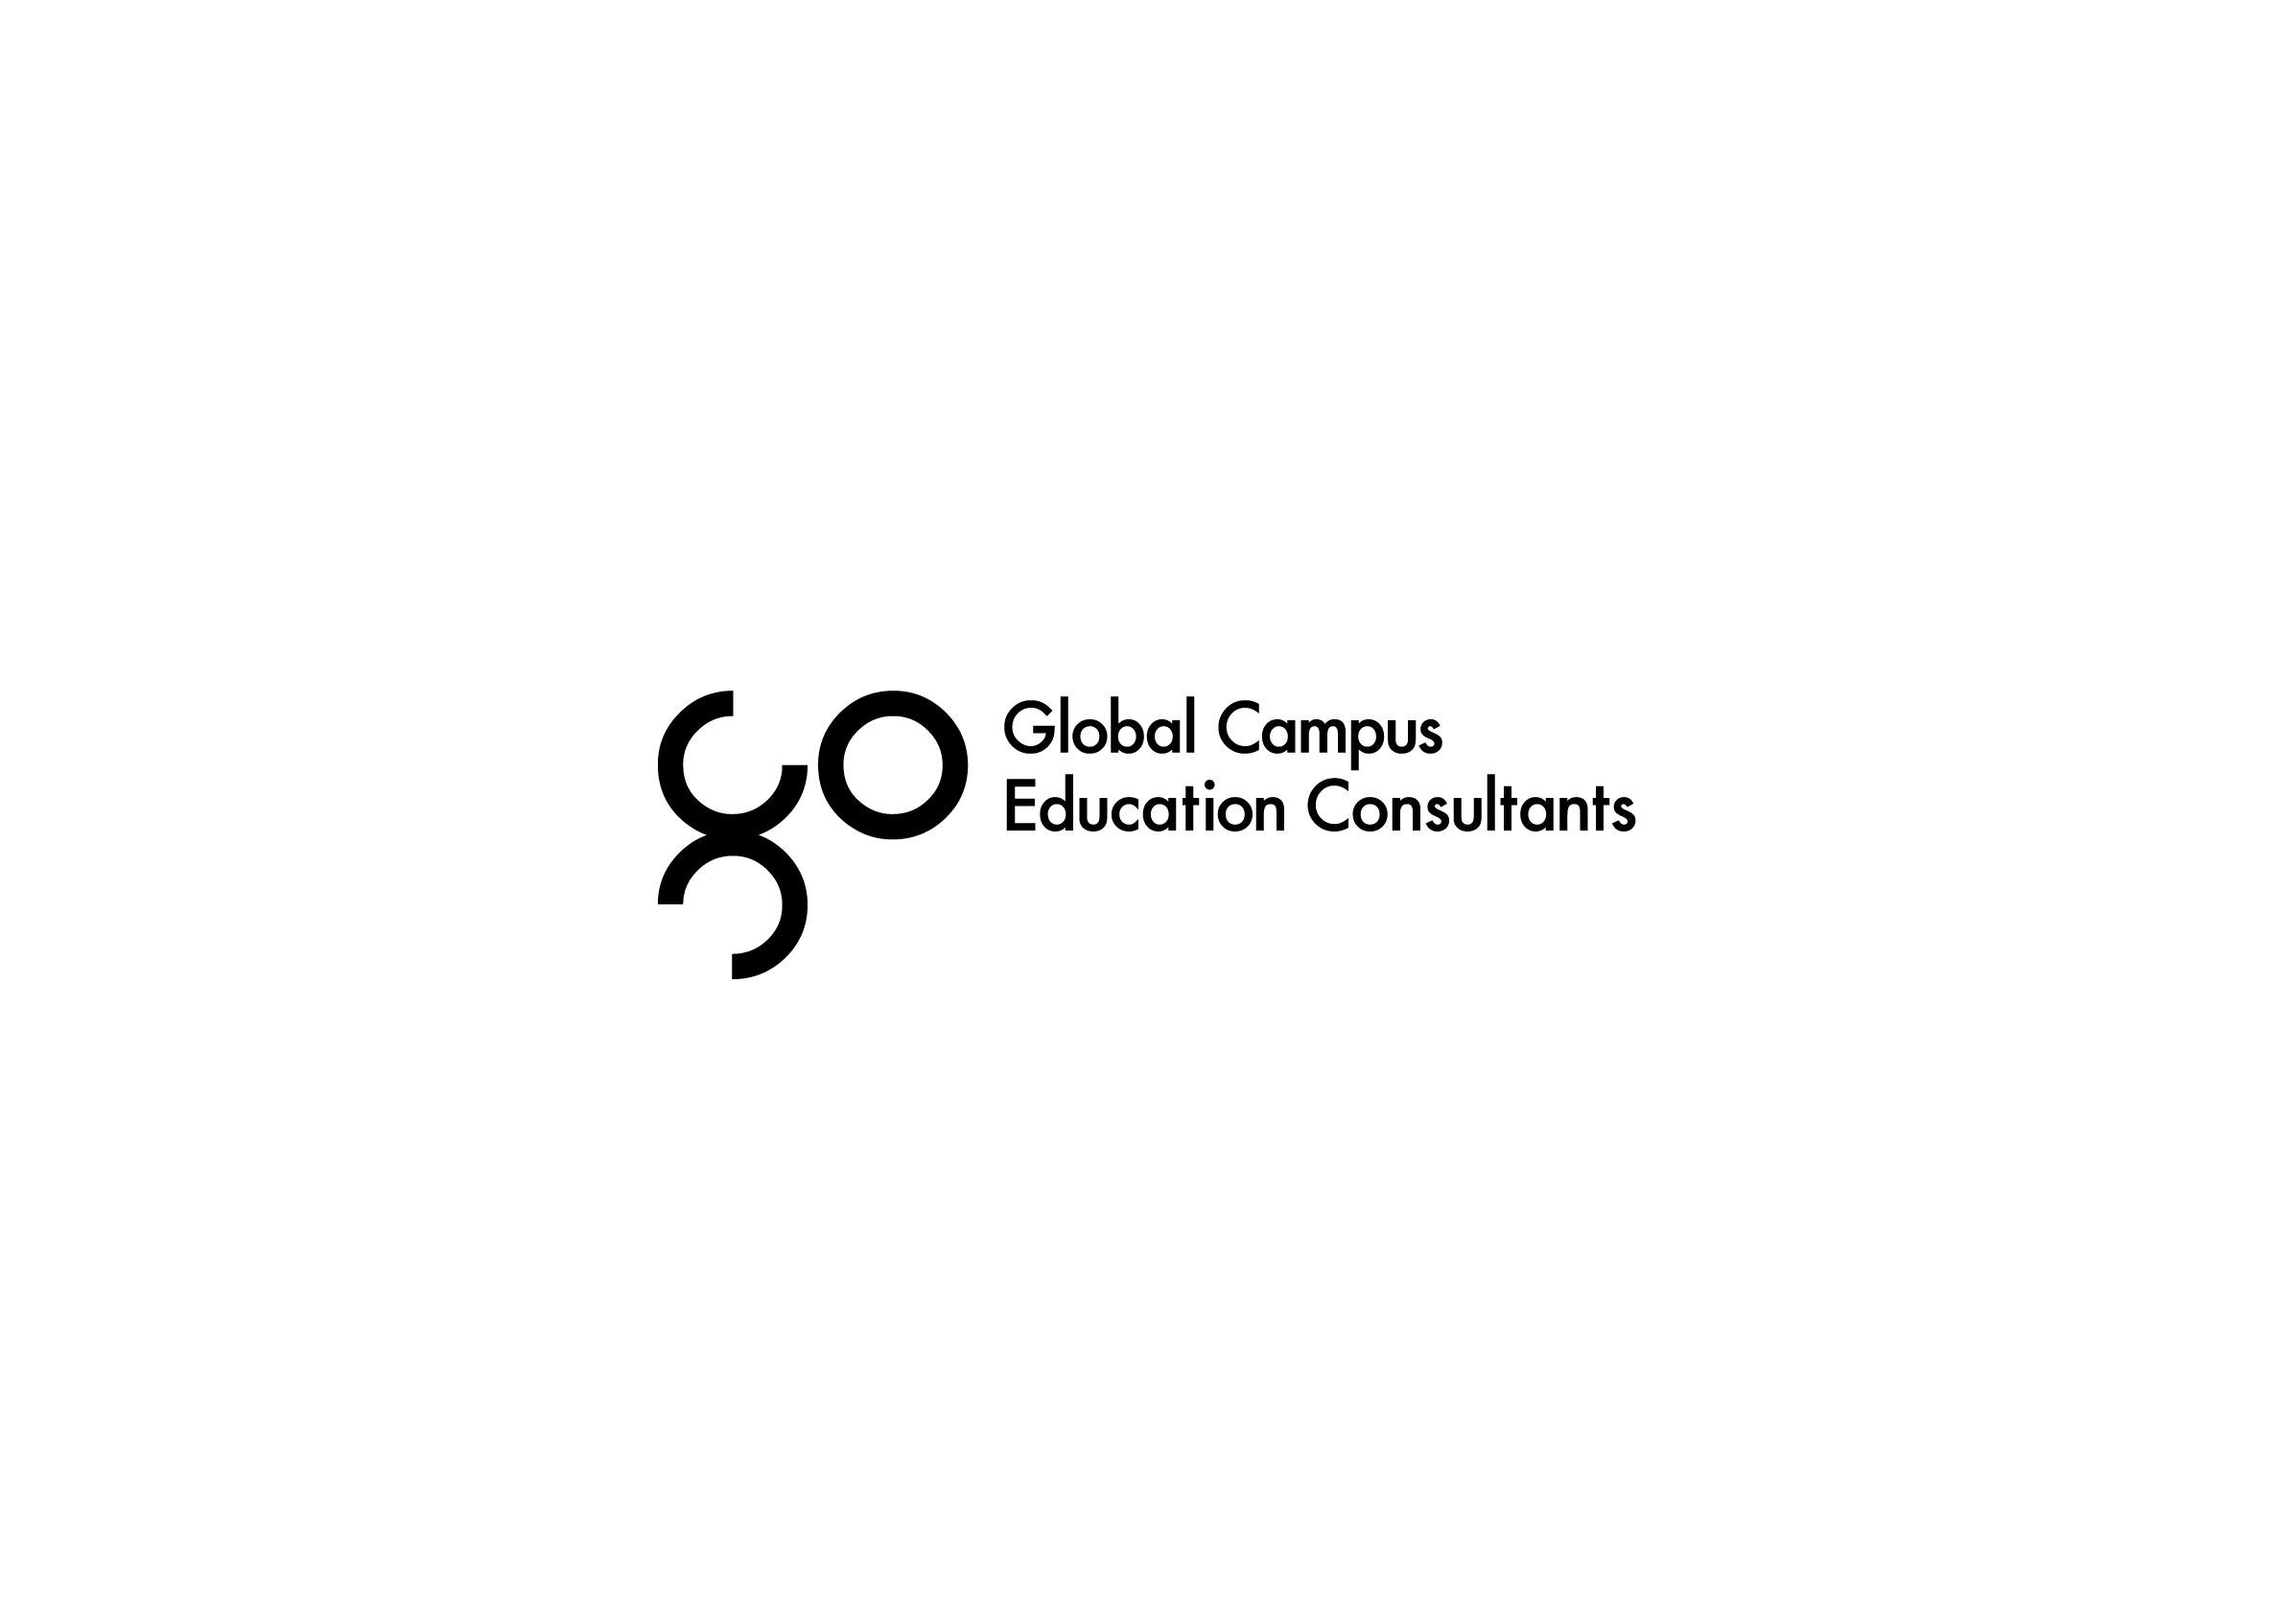 Logo Black for Global Campus Education Consultants, a student recruitment company by Ottawa Graphic Designer idApostle